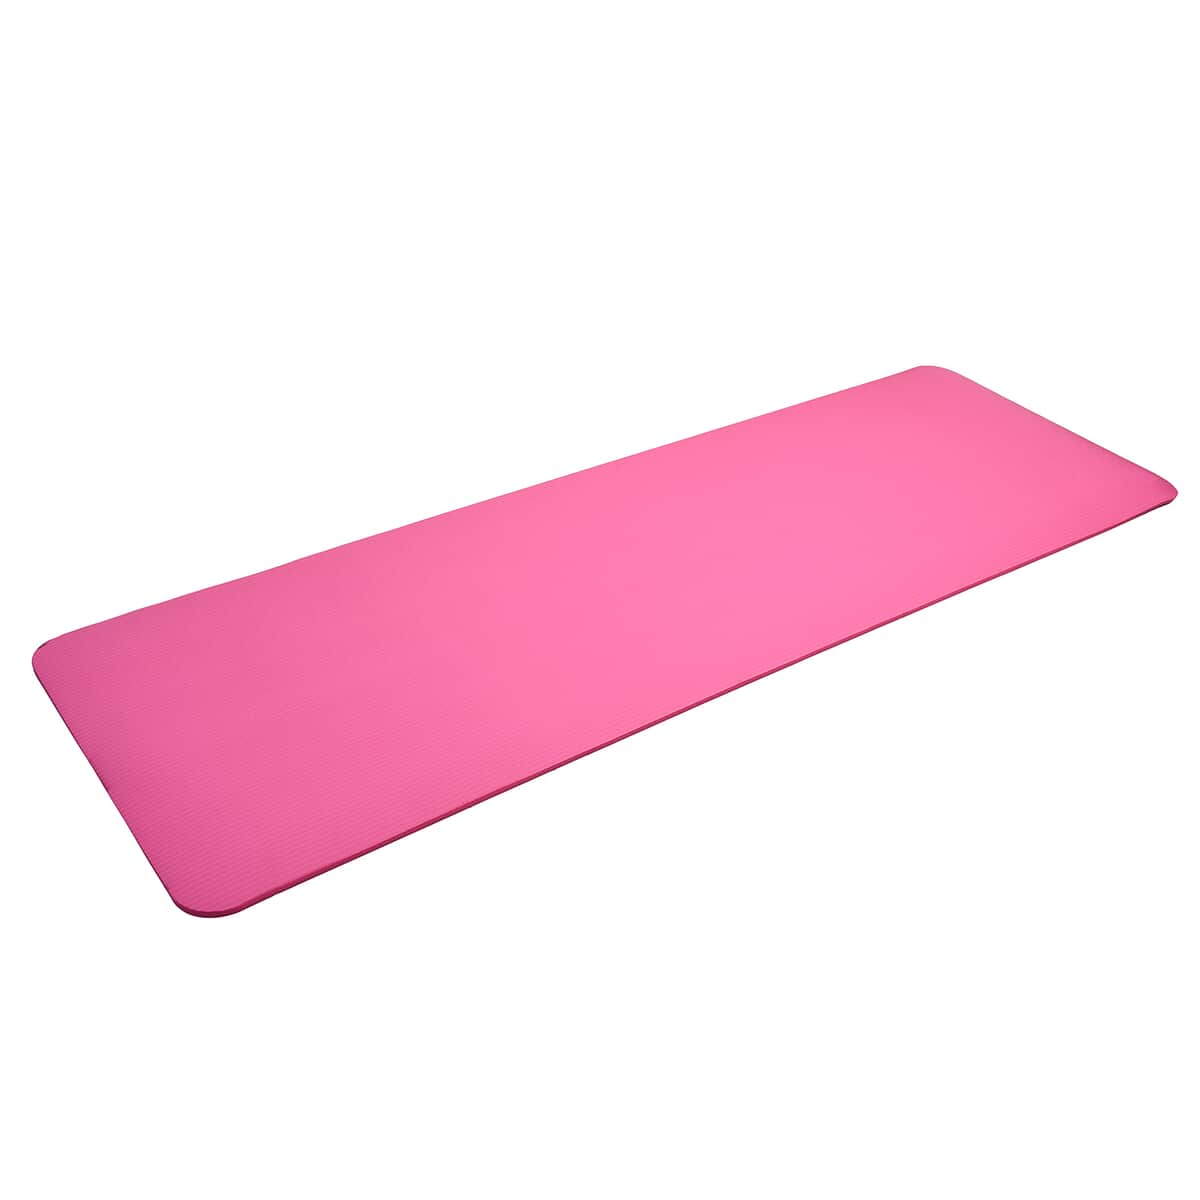 Pink Moisture Resistant NBR Yoga Mat with Strap image number 0